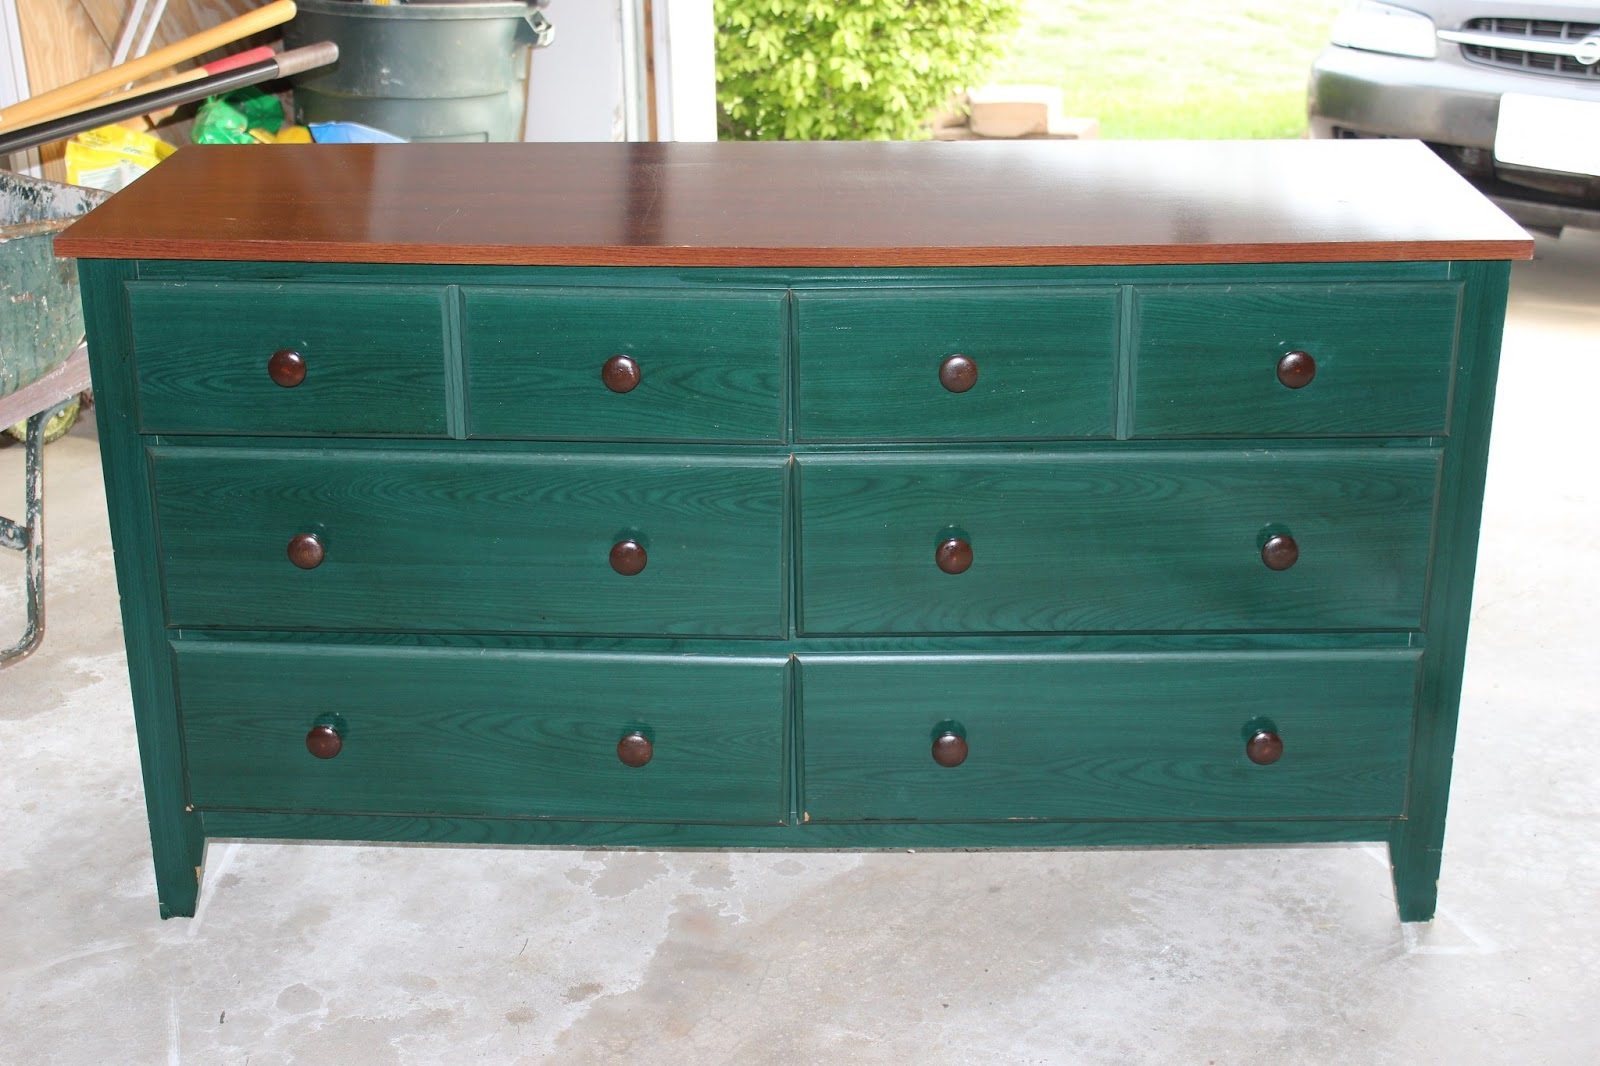 Old Dresser Makeover How To Paint Laminate Furniture